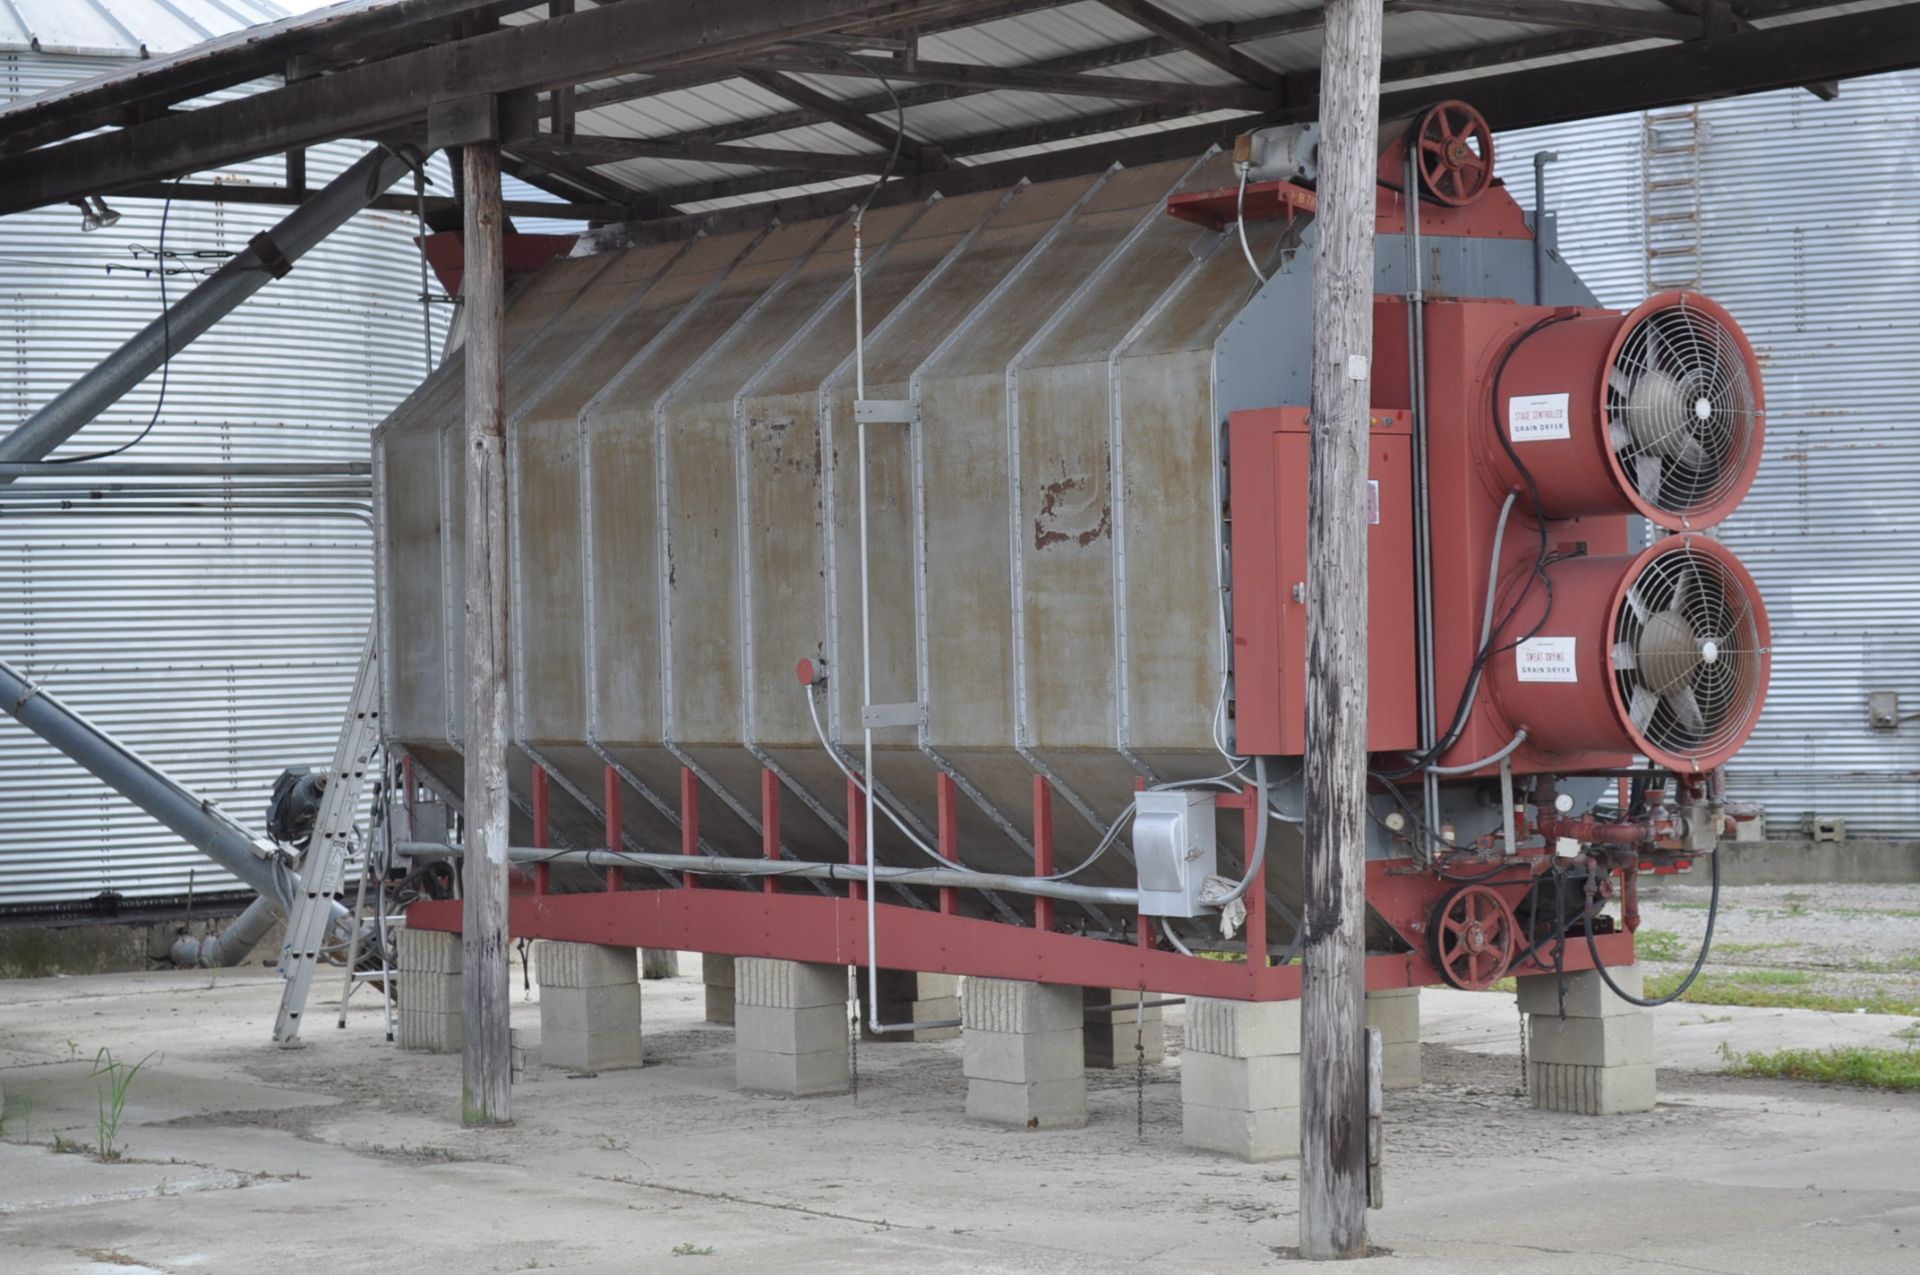 AS 1000 Super B grain dryer, 3 phase, LP, 30 day removal, Buyer is responsible for all removal